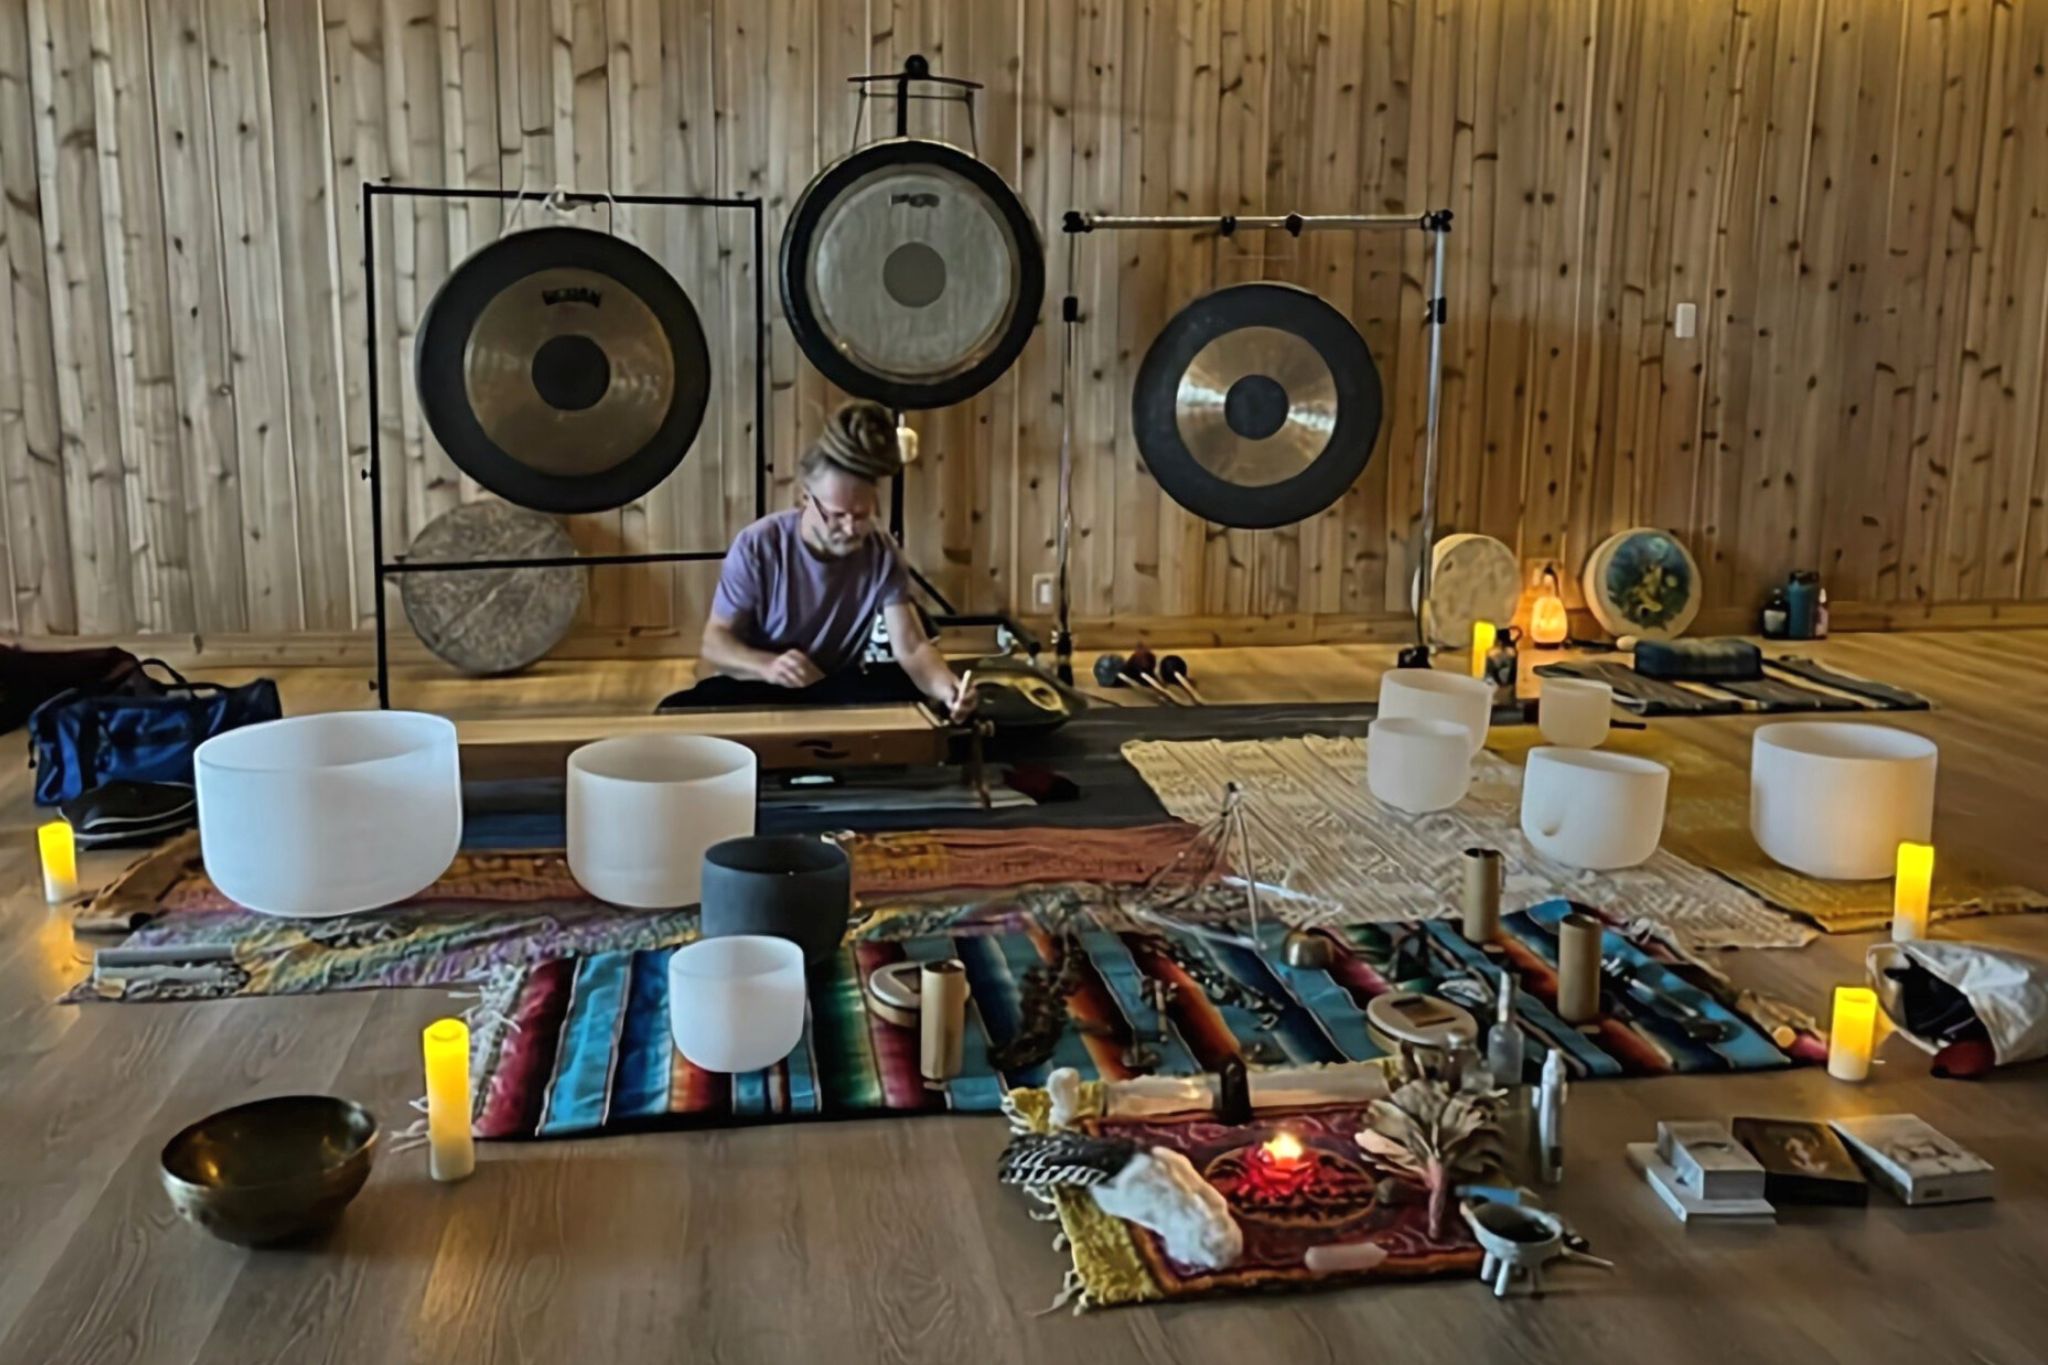 Scott performing a sound bath experience